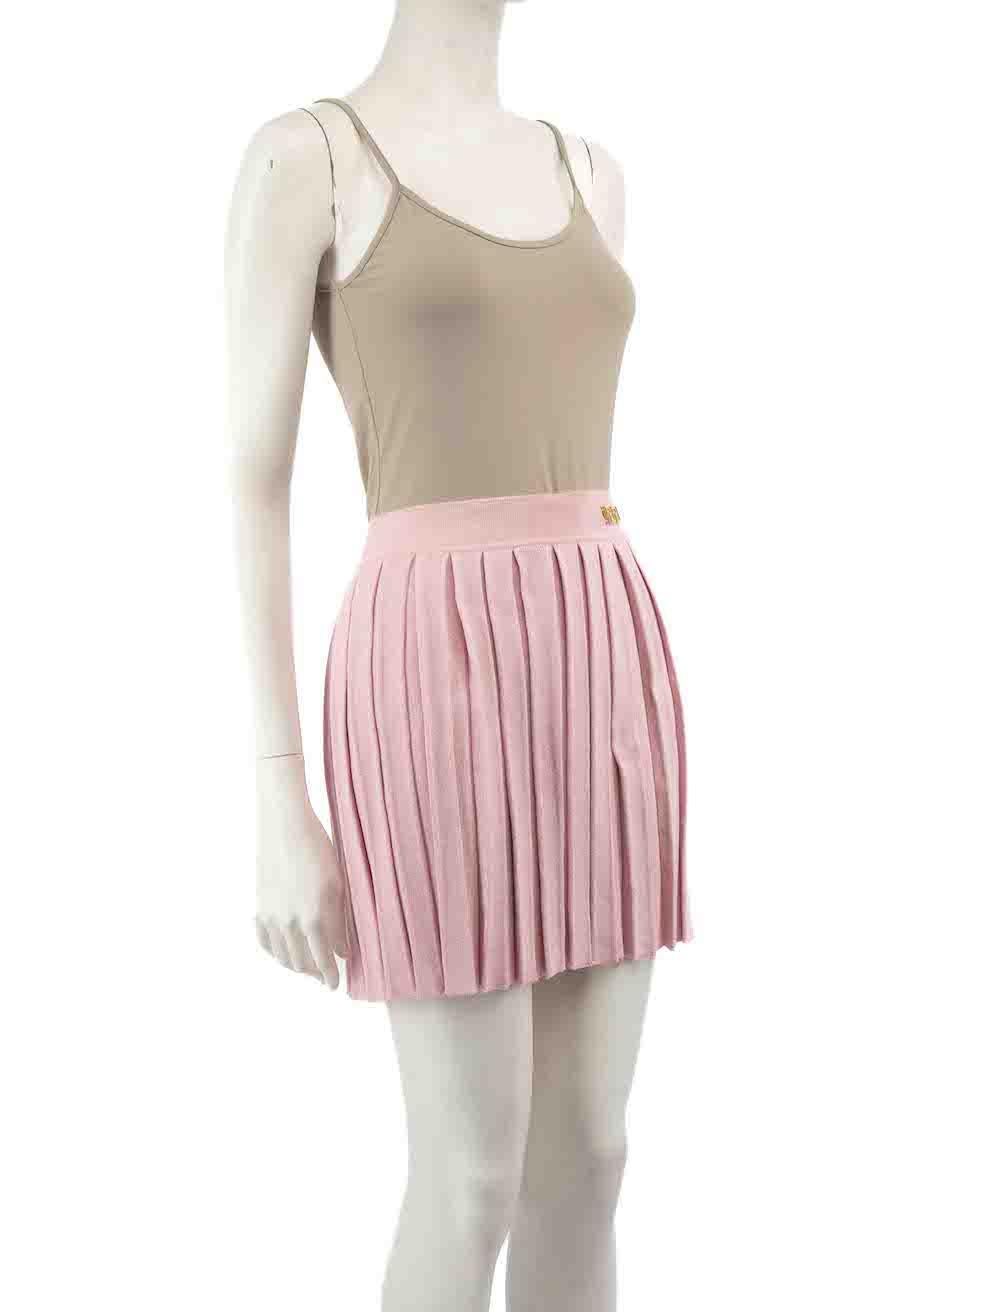 CONDITION is Very good. Hardly any visible wear to skirt is evident on this used Versace designer resale item.
 
 
 
 Details
 
 
 Pink
 
 Silk
 
 Skirt
 
 Pleated
 
 Mini
 
 Gold logo detail
 
 Elasticated waistband
 
 
 
 
 
 Made in Italy
 
 
 
